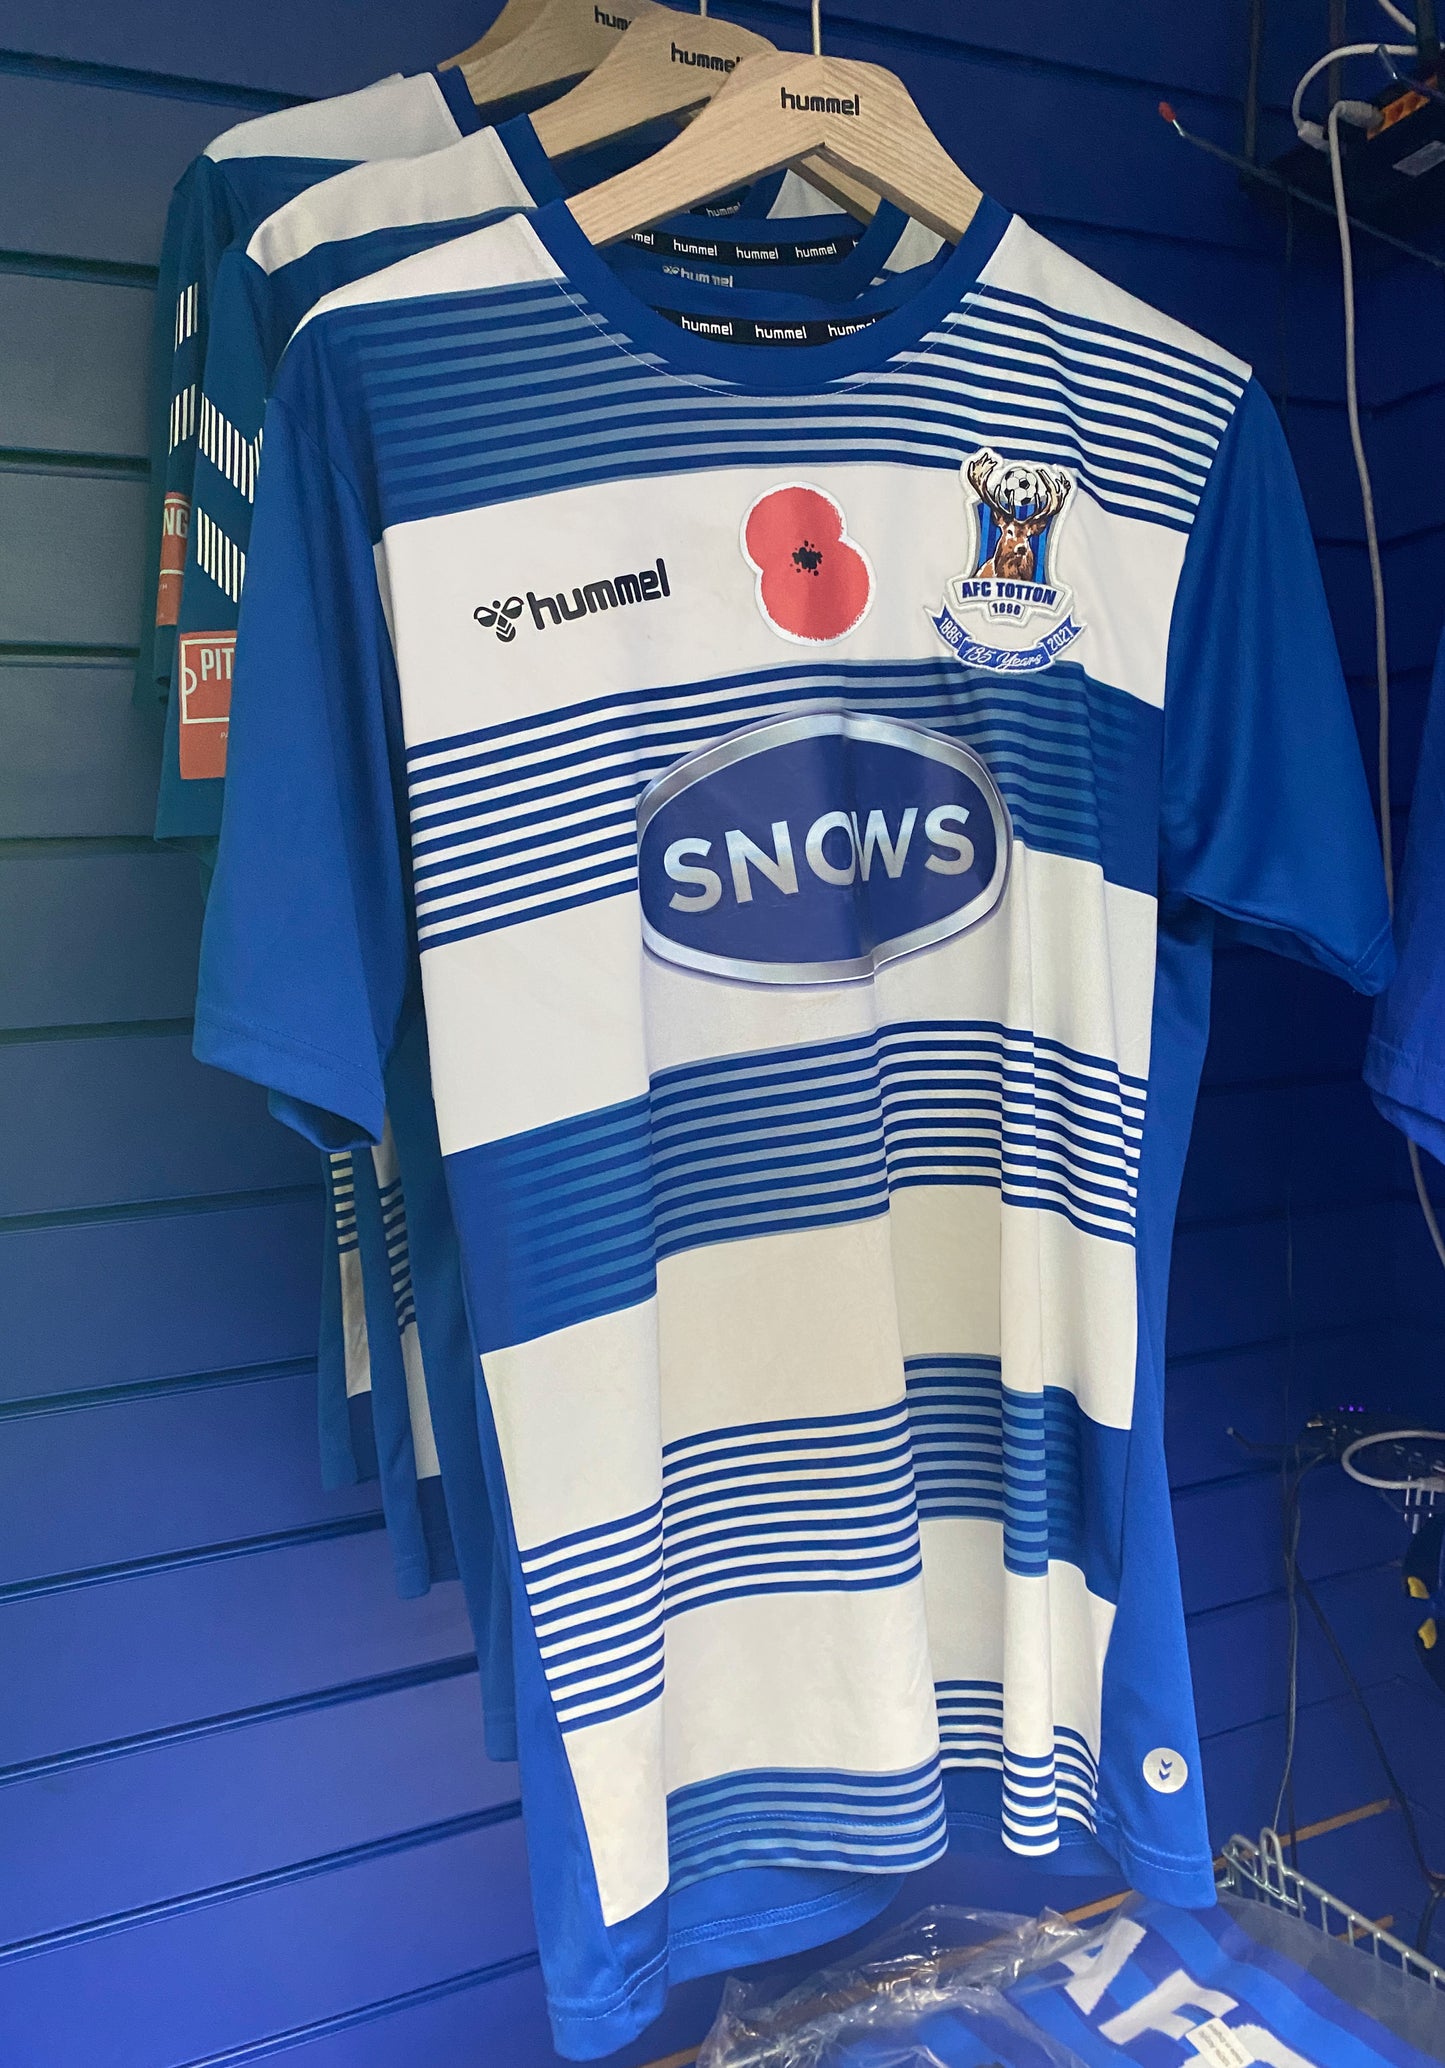 Limited Edition AFC Totton Poppy Appeal Top size M